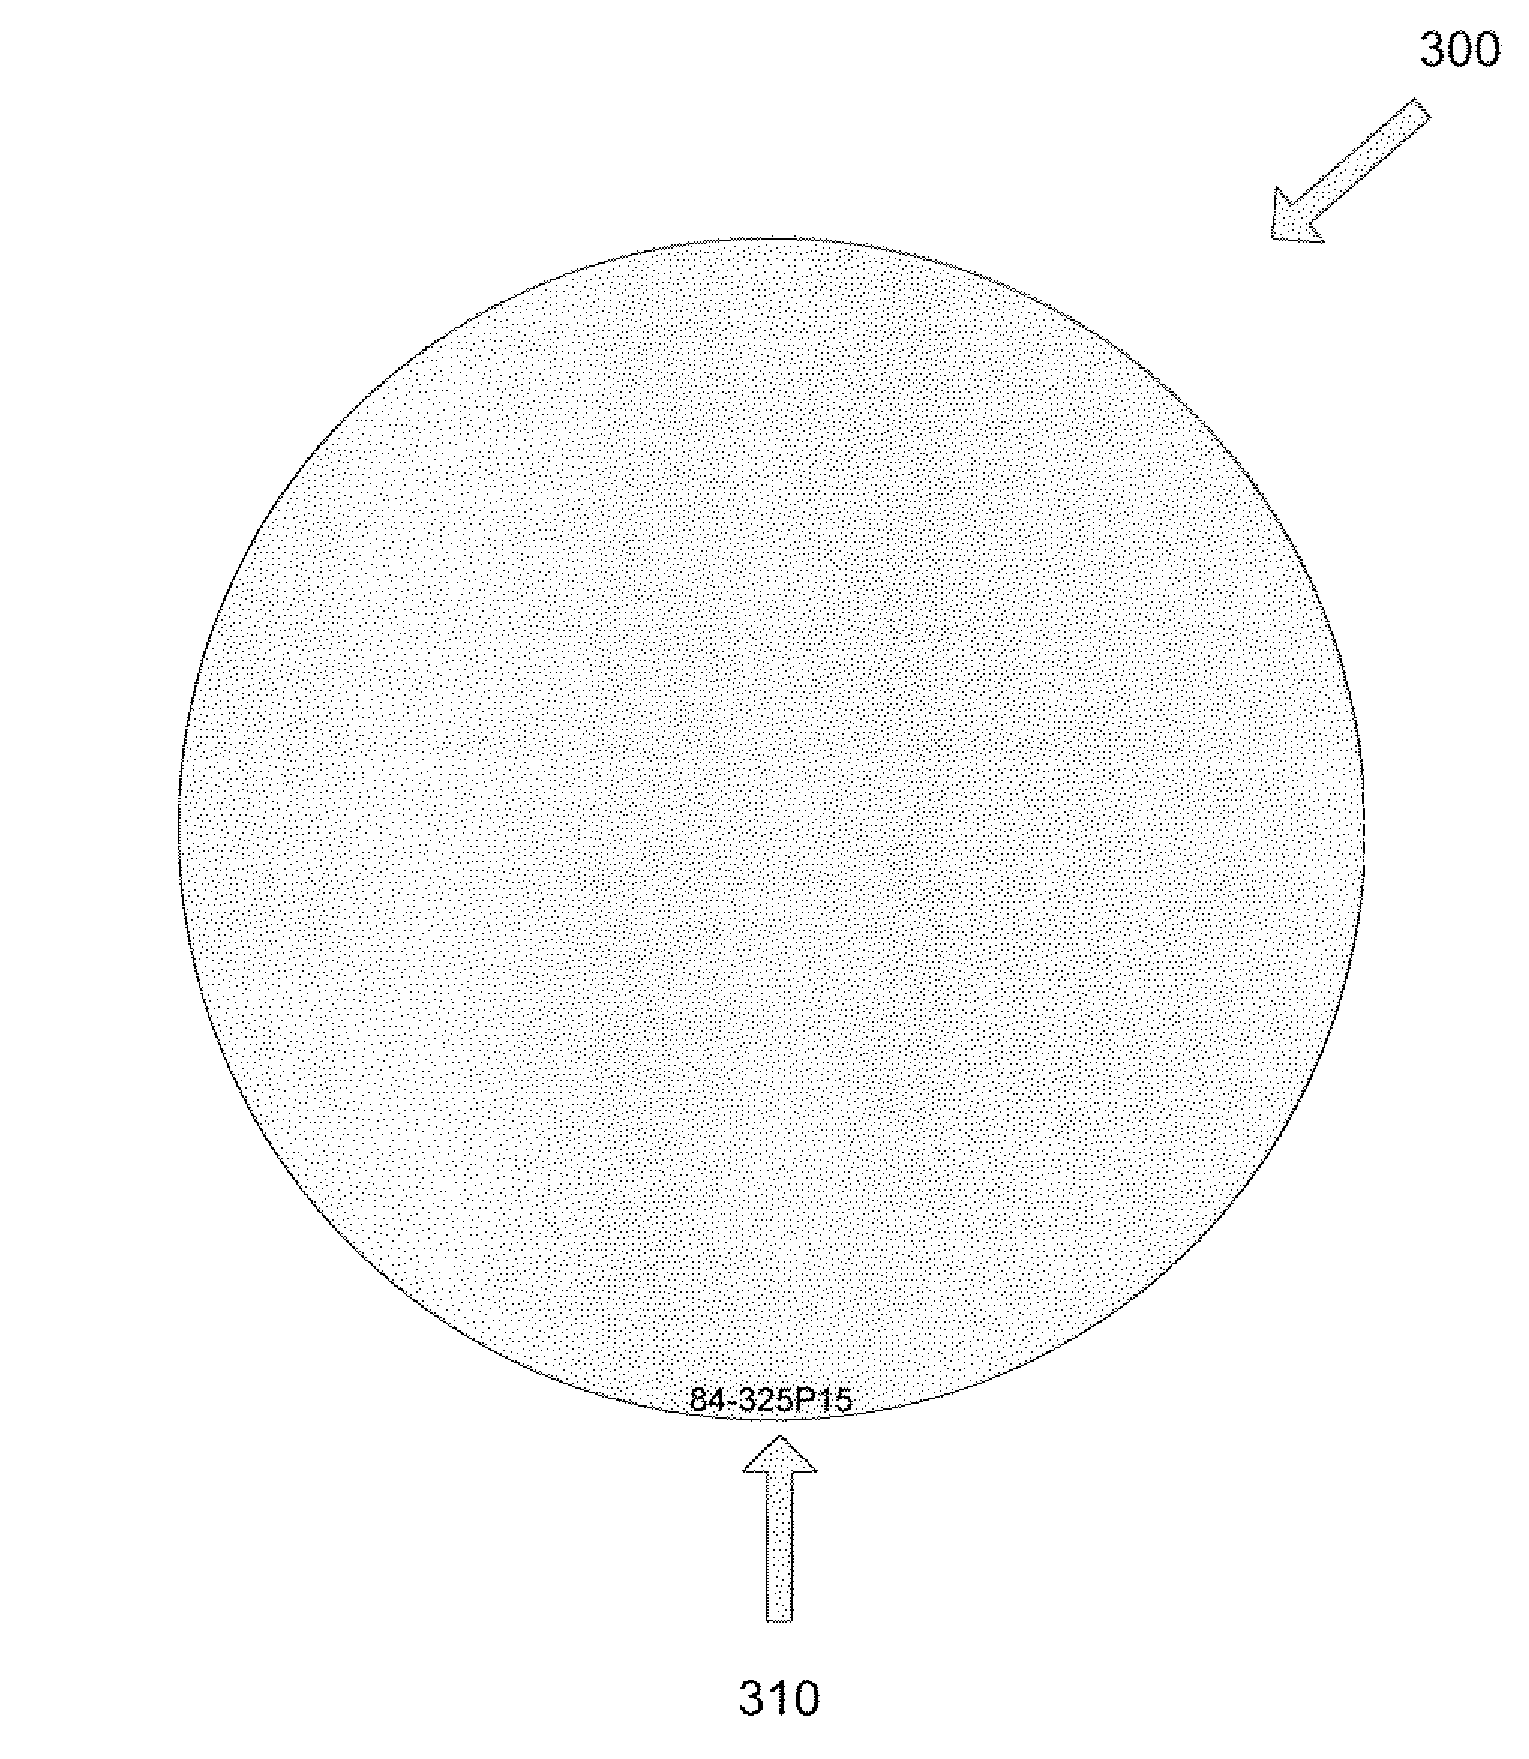 Kit of higher order aberration contact lenses and methods of use